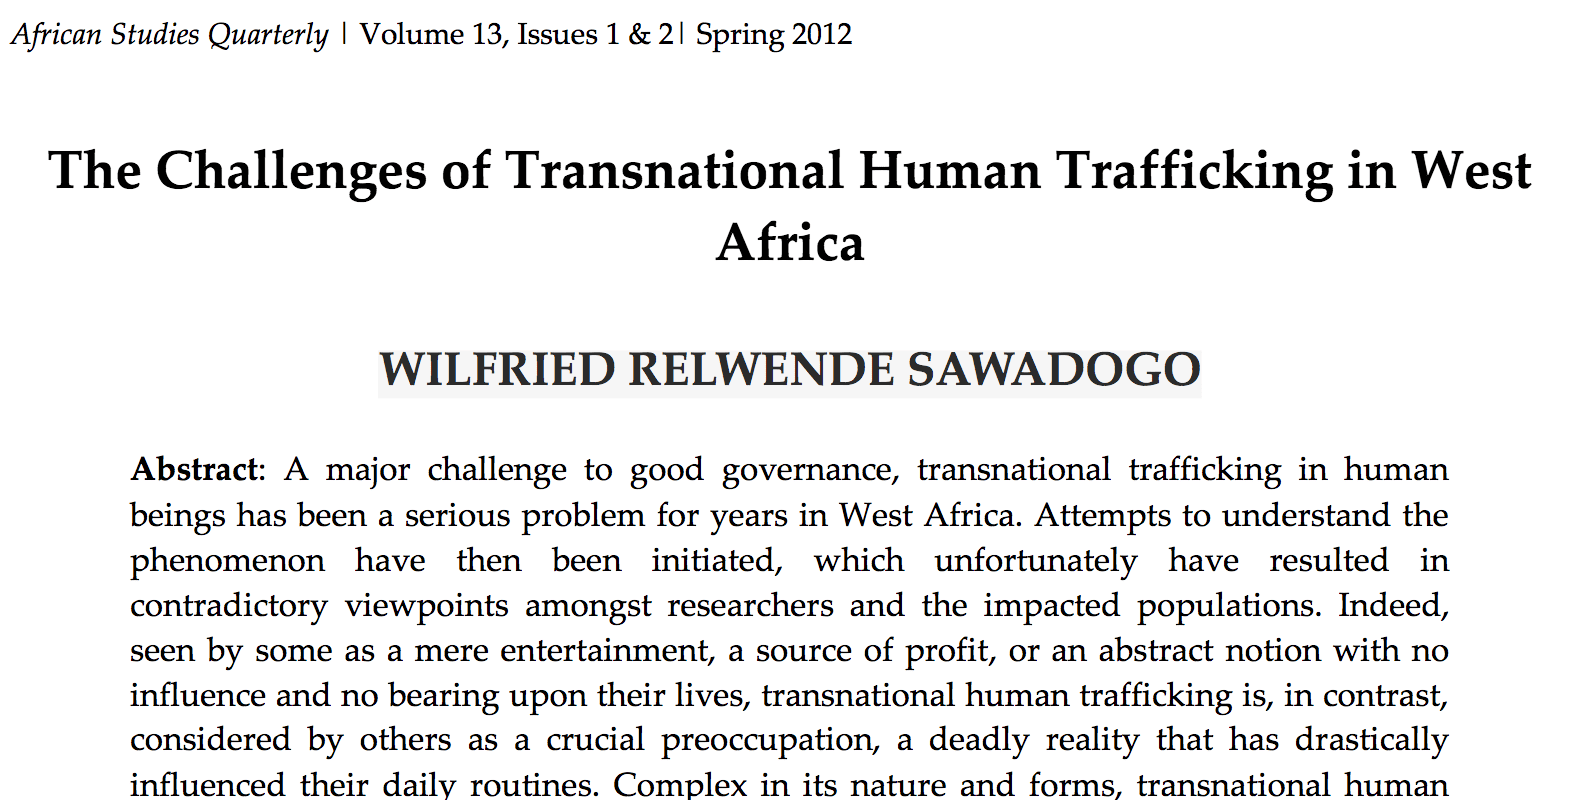 The Challenges of Transnational Human Trafficking in West Africa